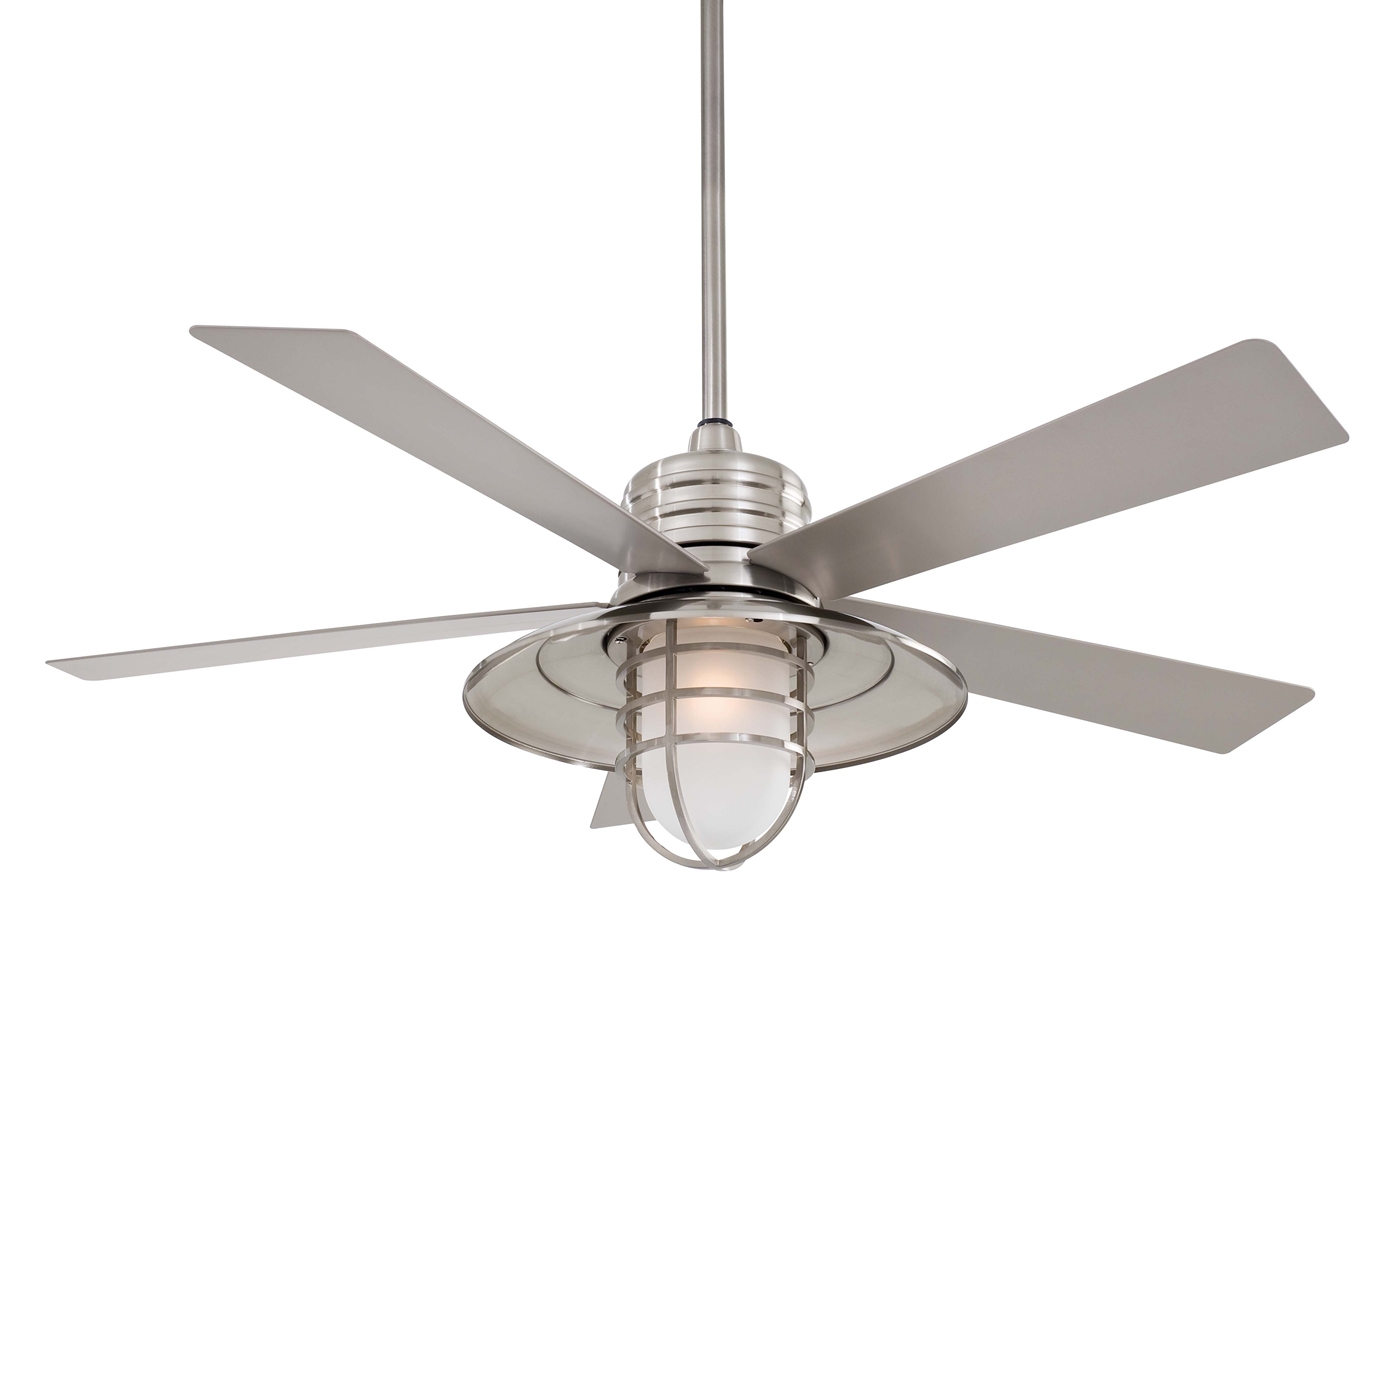 Permalink to Industrial Outdoor Ceiling Fan With Light